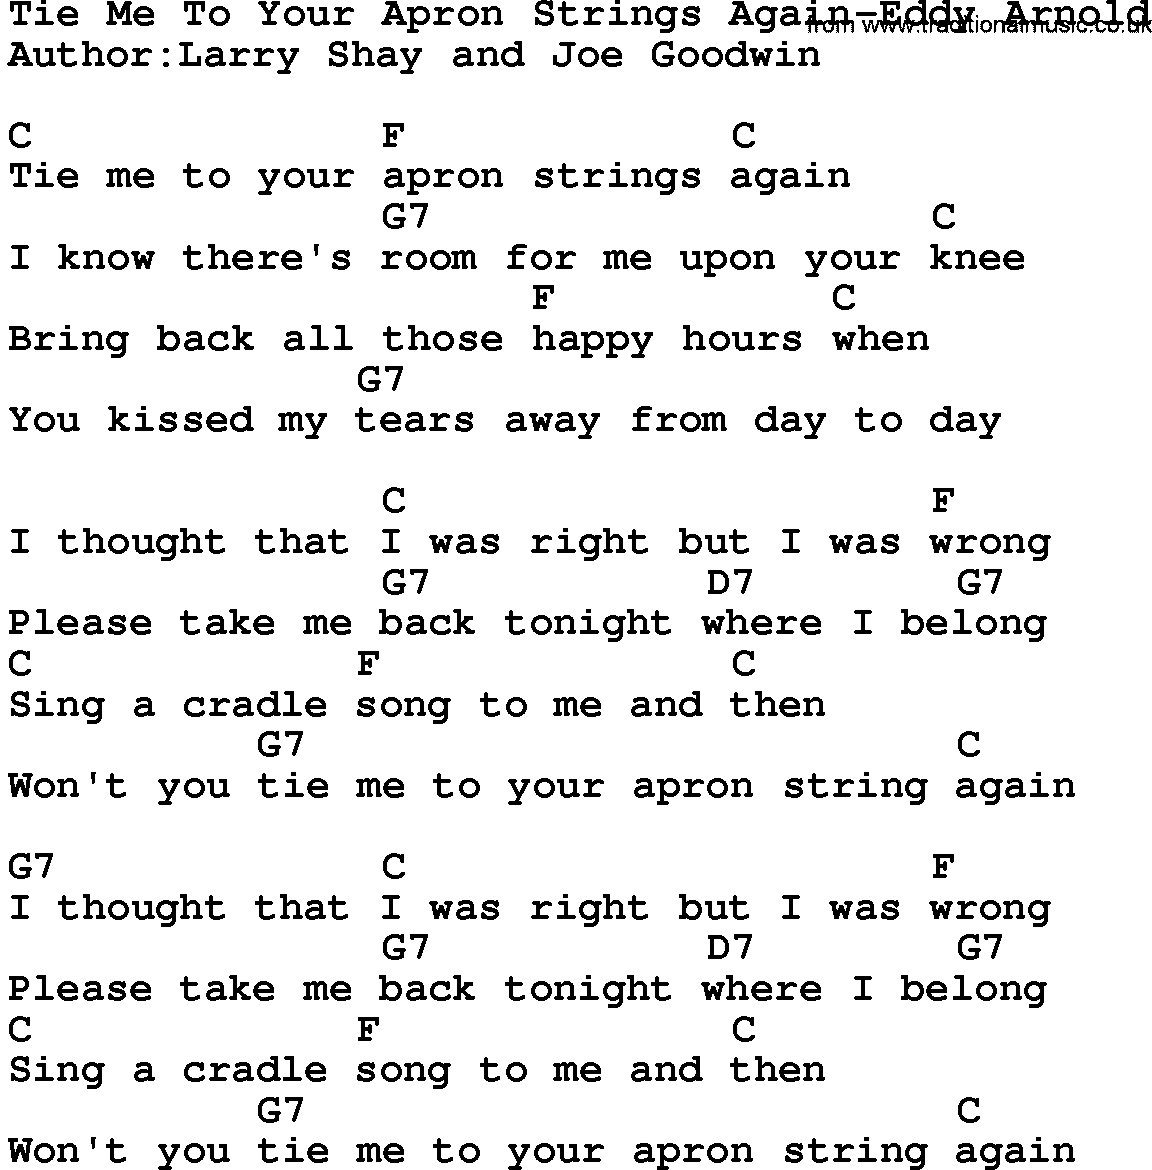 Country music song: Tie Me To Your Apron Strings Again-Eddy Arnold lyrics and chords